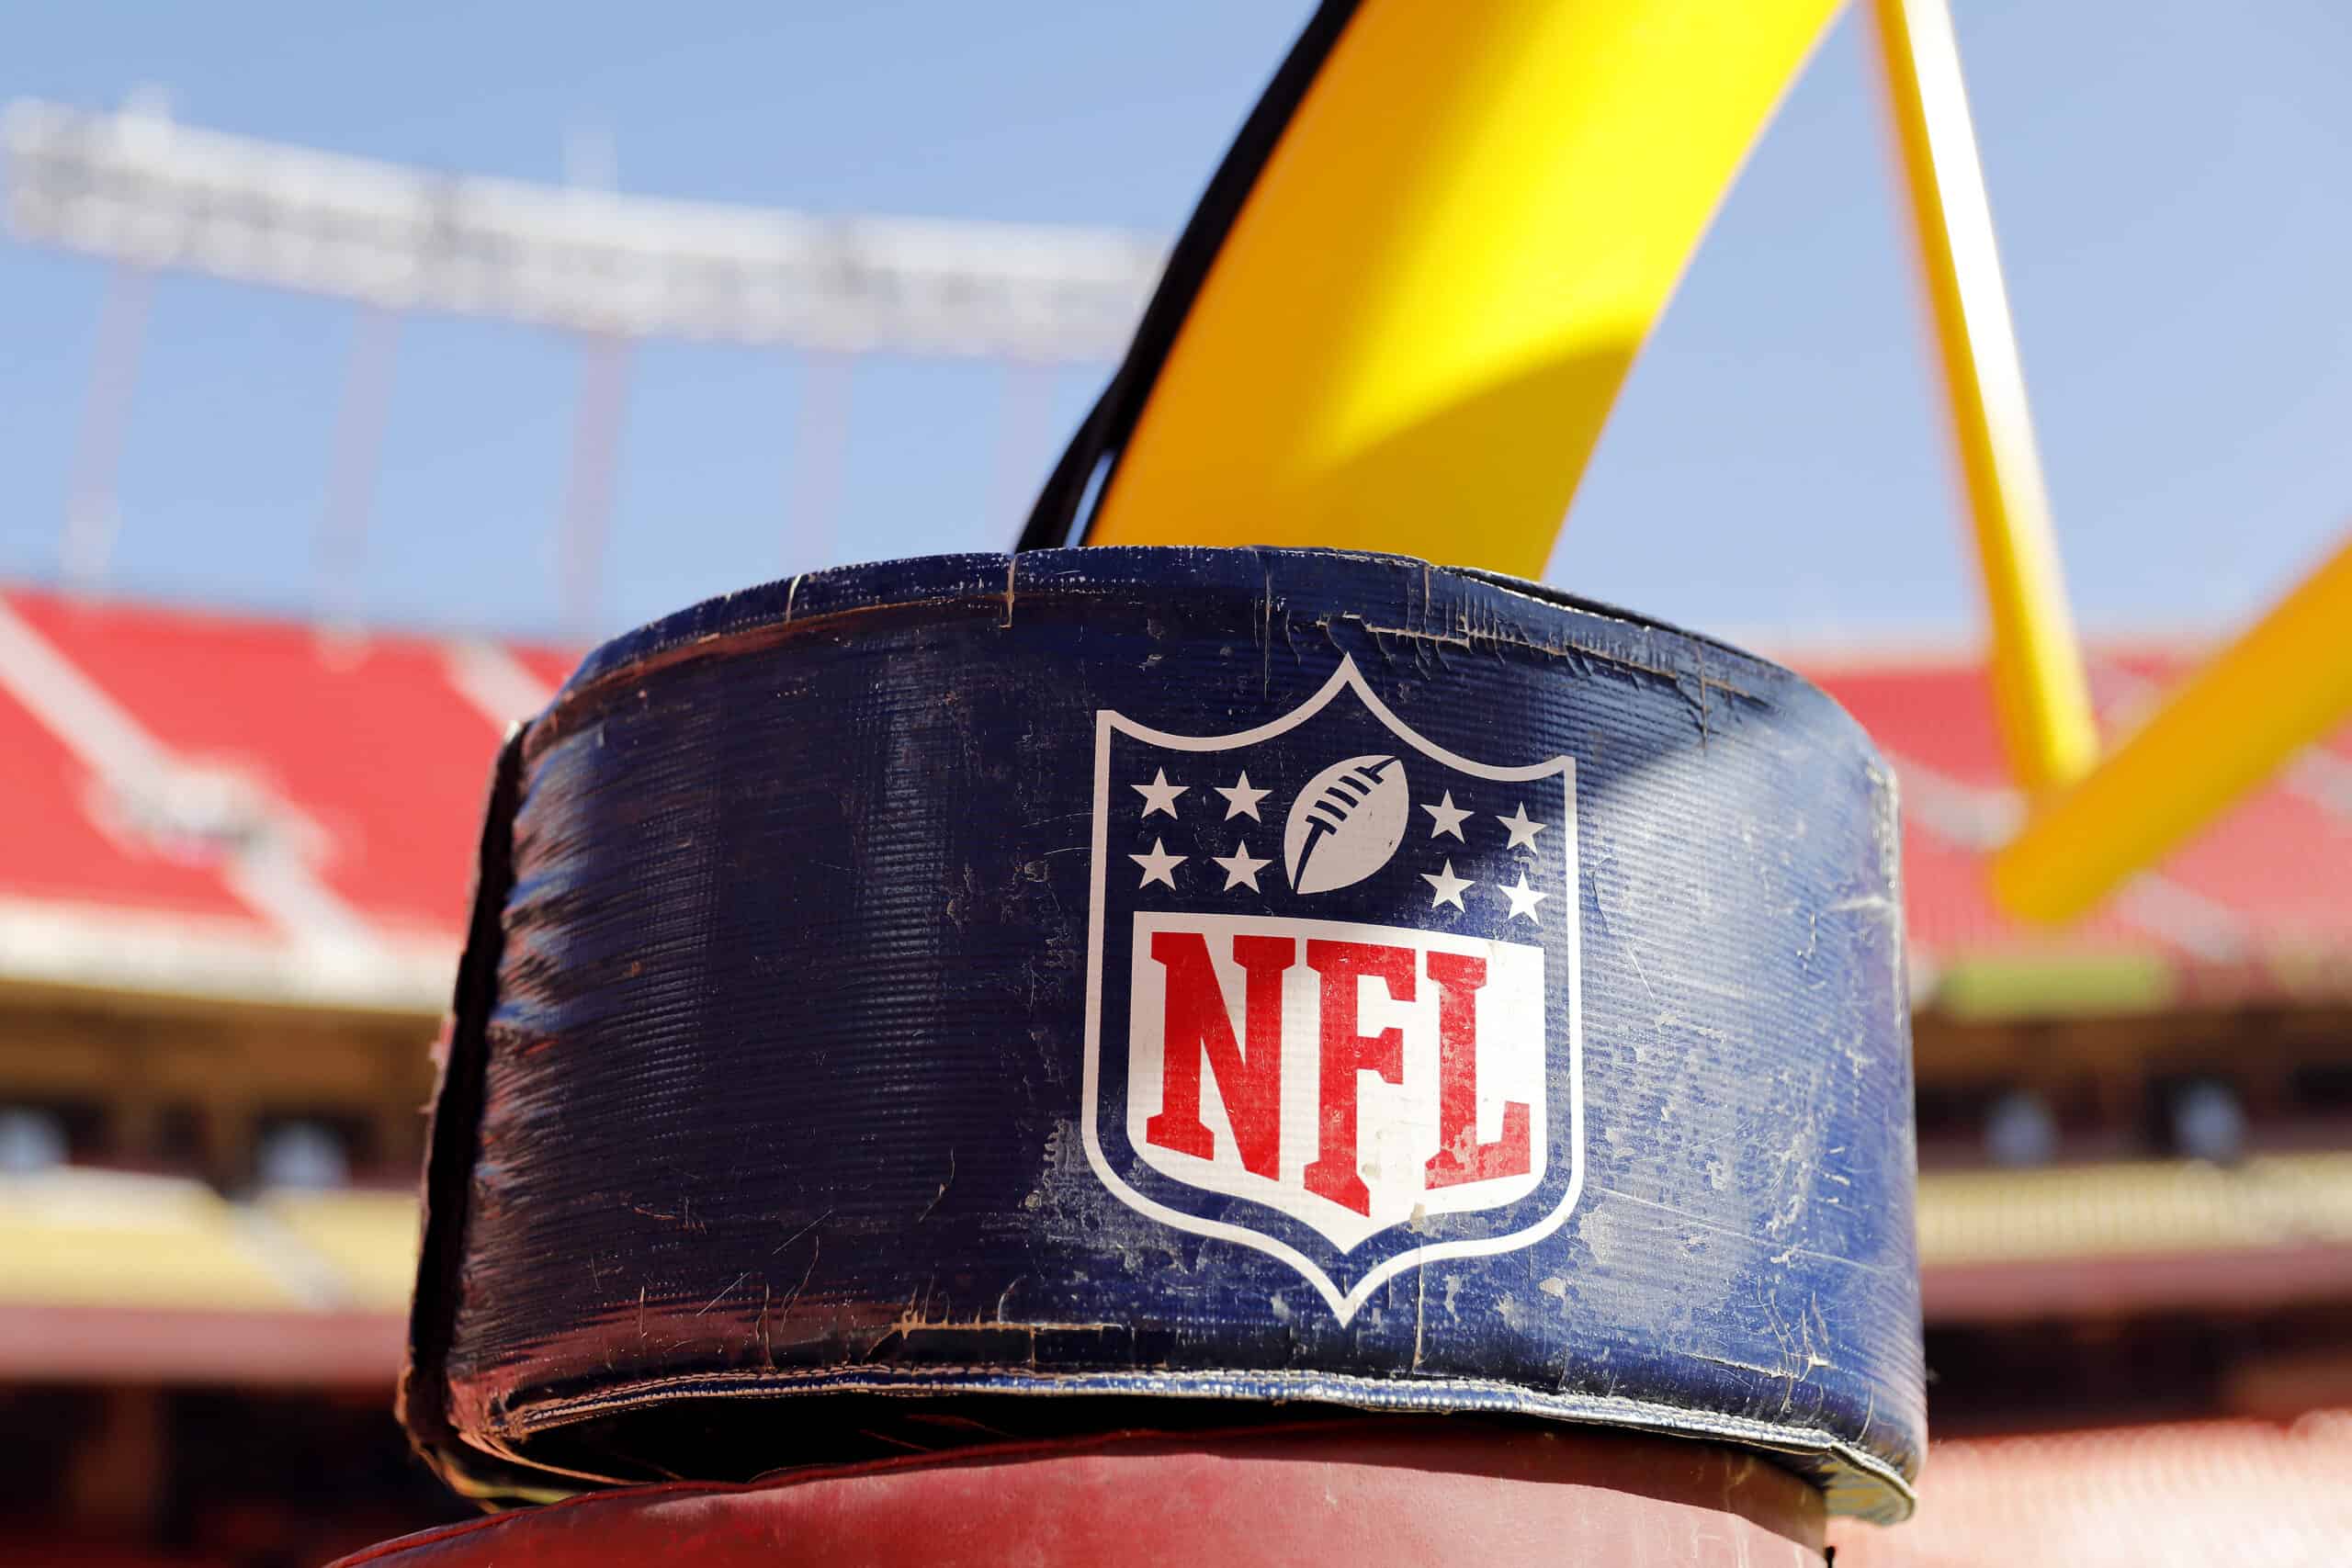 A detail view of the NFL logo on the goal post stanchion before the AFC Championship Game between the AFC Kansas City Chiefs and the Tennessee Titans at Arrowhead Stadium on January 19, 2020 in Kansas City, Missouri.